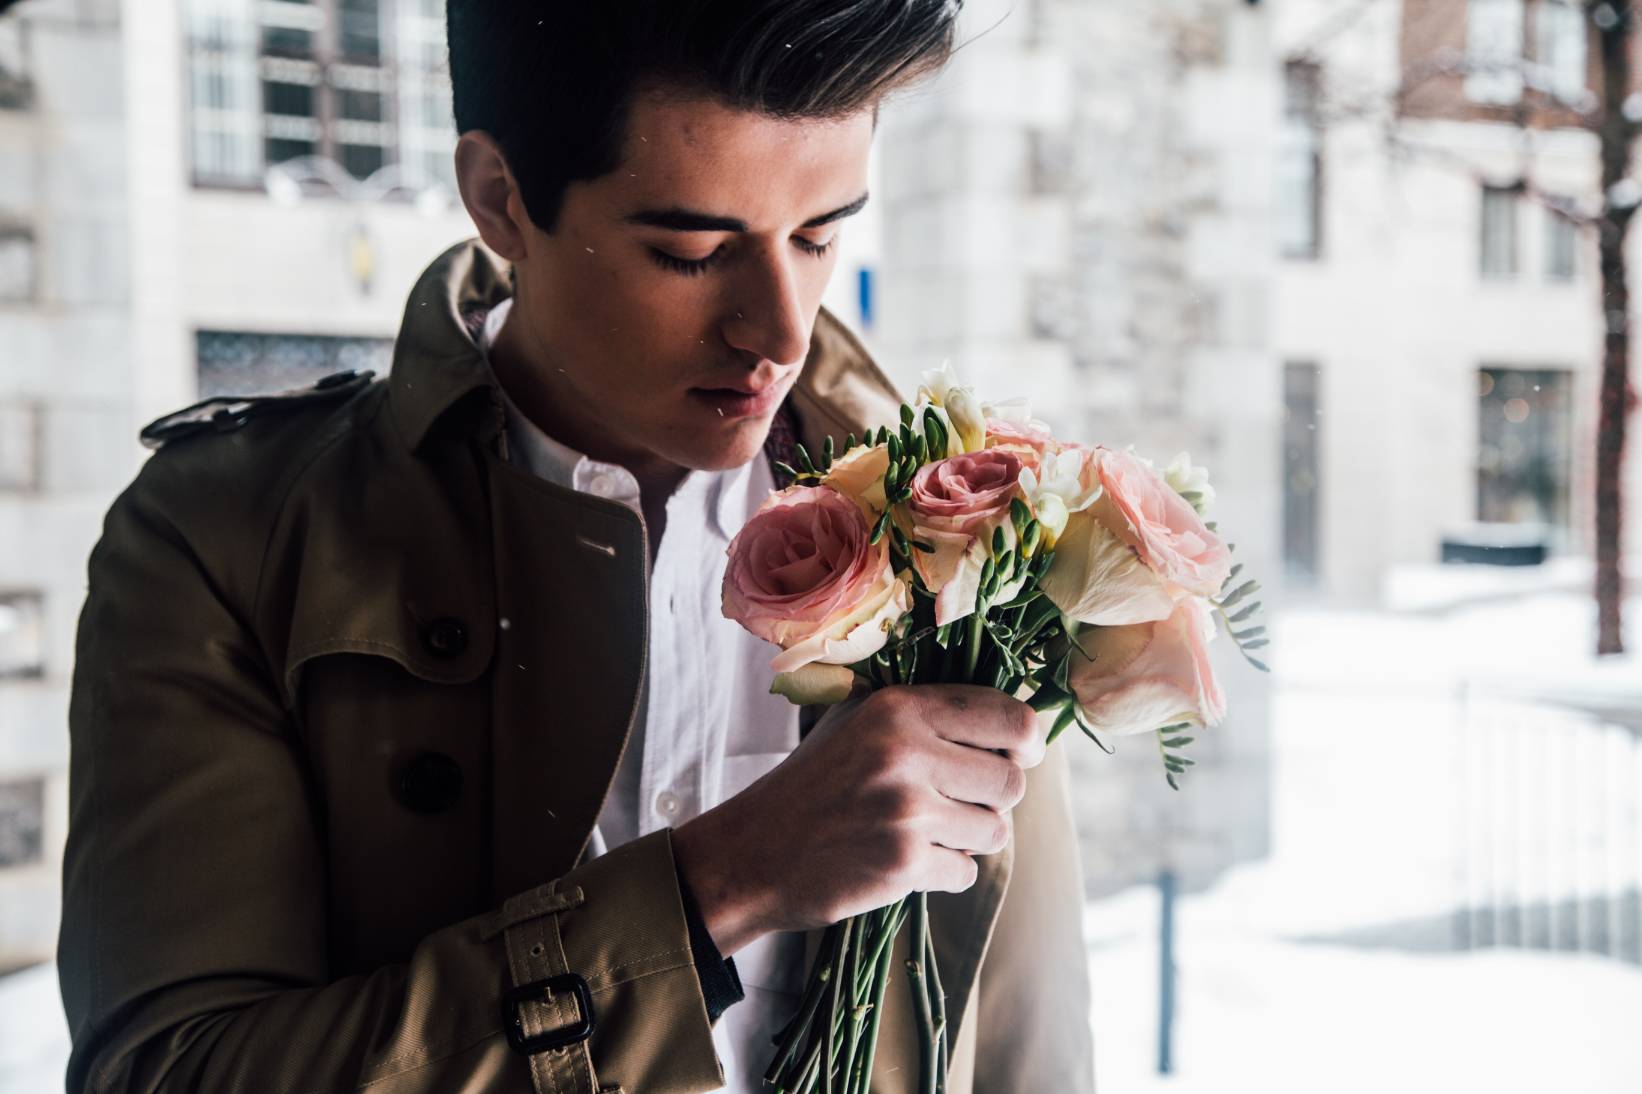 A man holding a bouquet of flowers